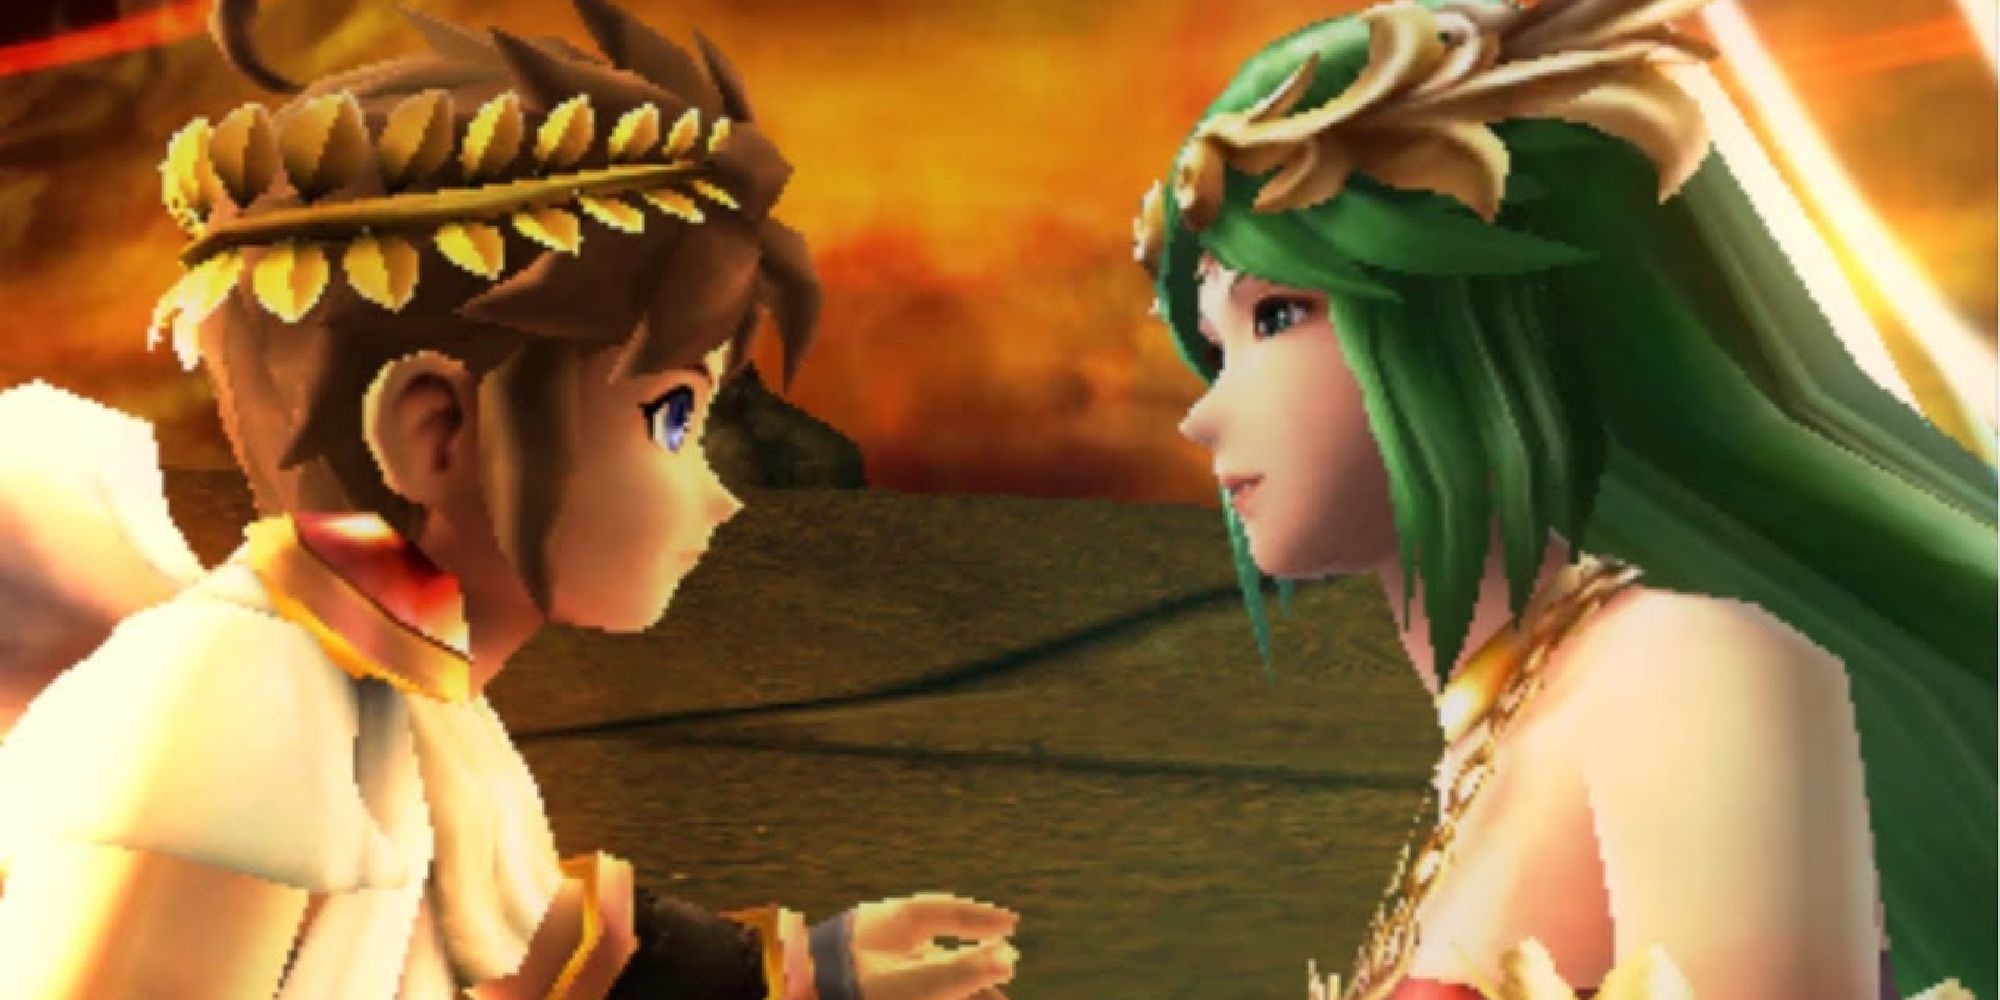 Pit facing Palutena in a cutscene from Kid Icarus Uprising